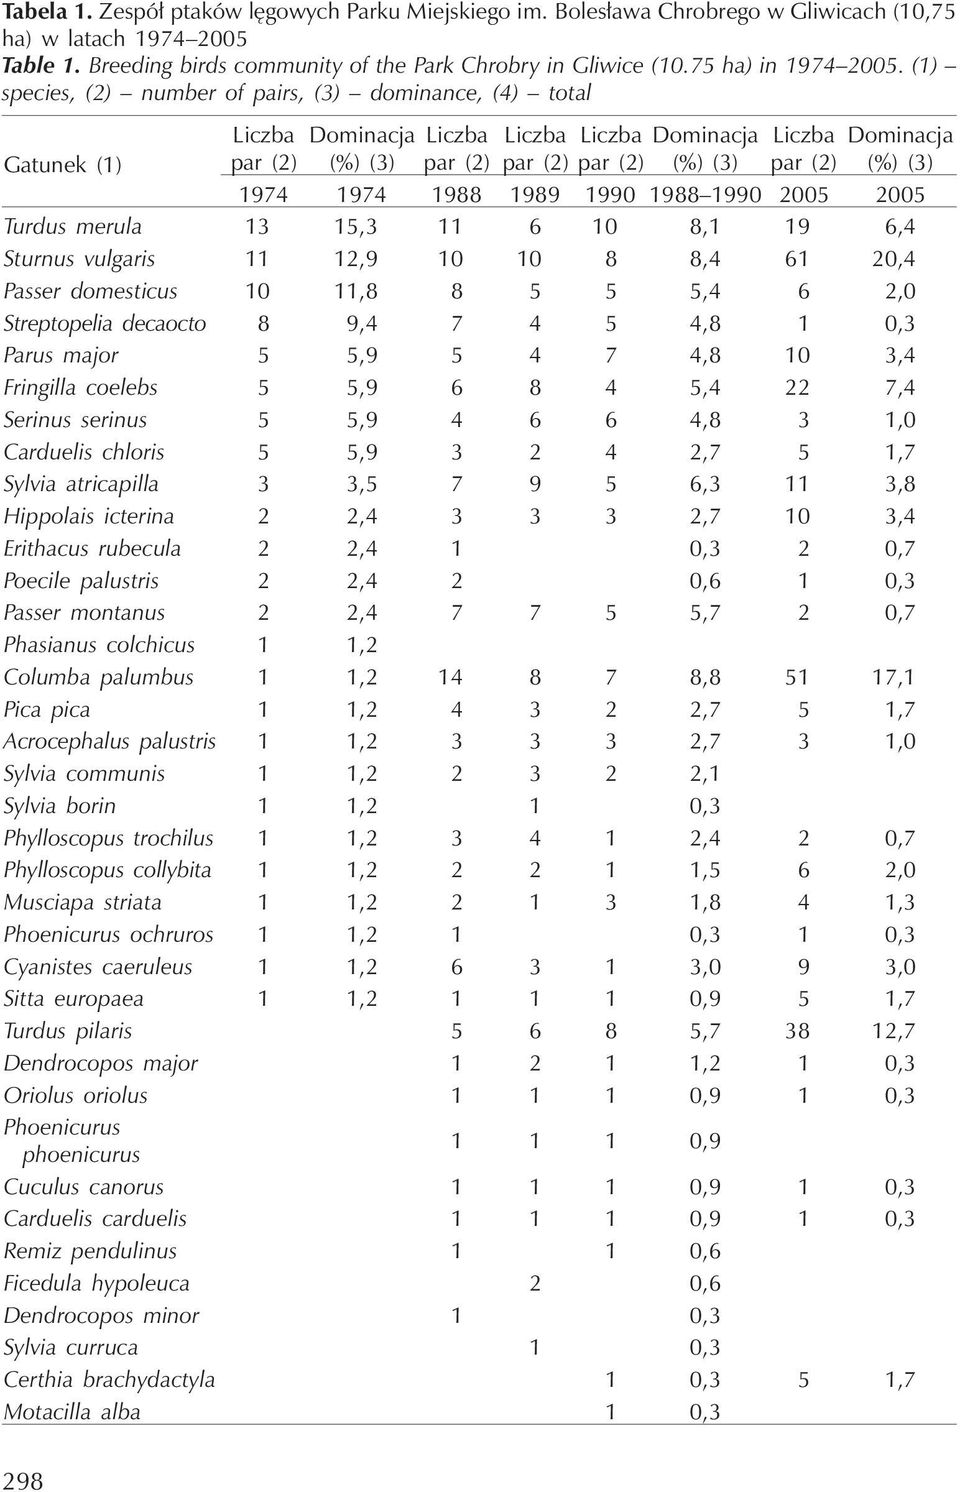 (1) species, (2) number of pairs, (3) dominance, (4) total Liczba Dominacja Liczba Liczba Liczba Dominacja Liczba Dominacja Gatunek (1) par (2) (%) (3) par (2) par (2) par (2) (%) (3) par (2) (%) (3)